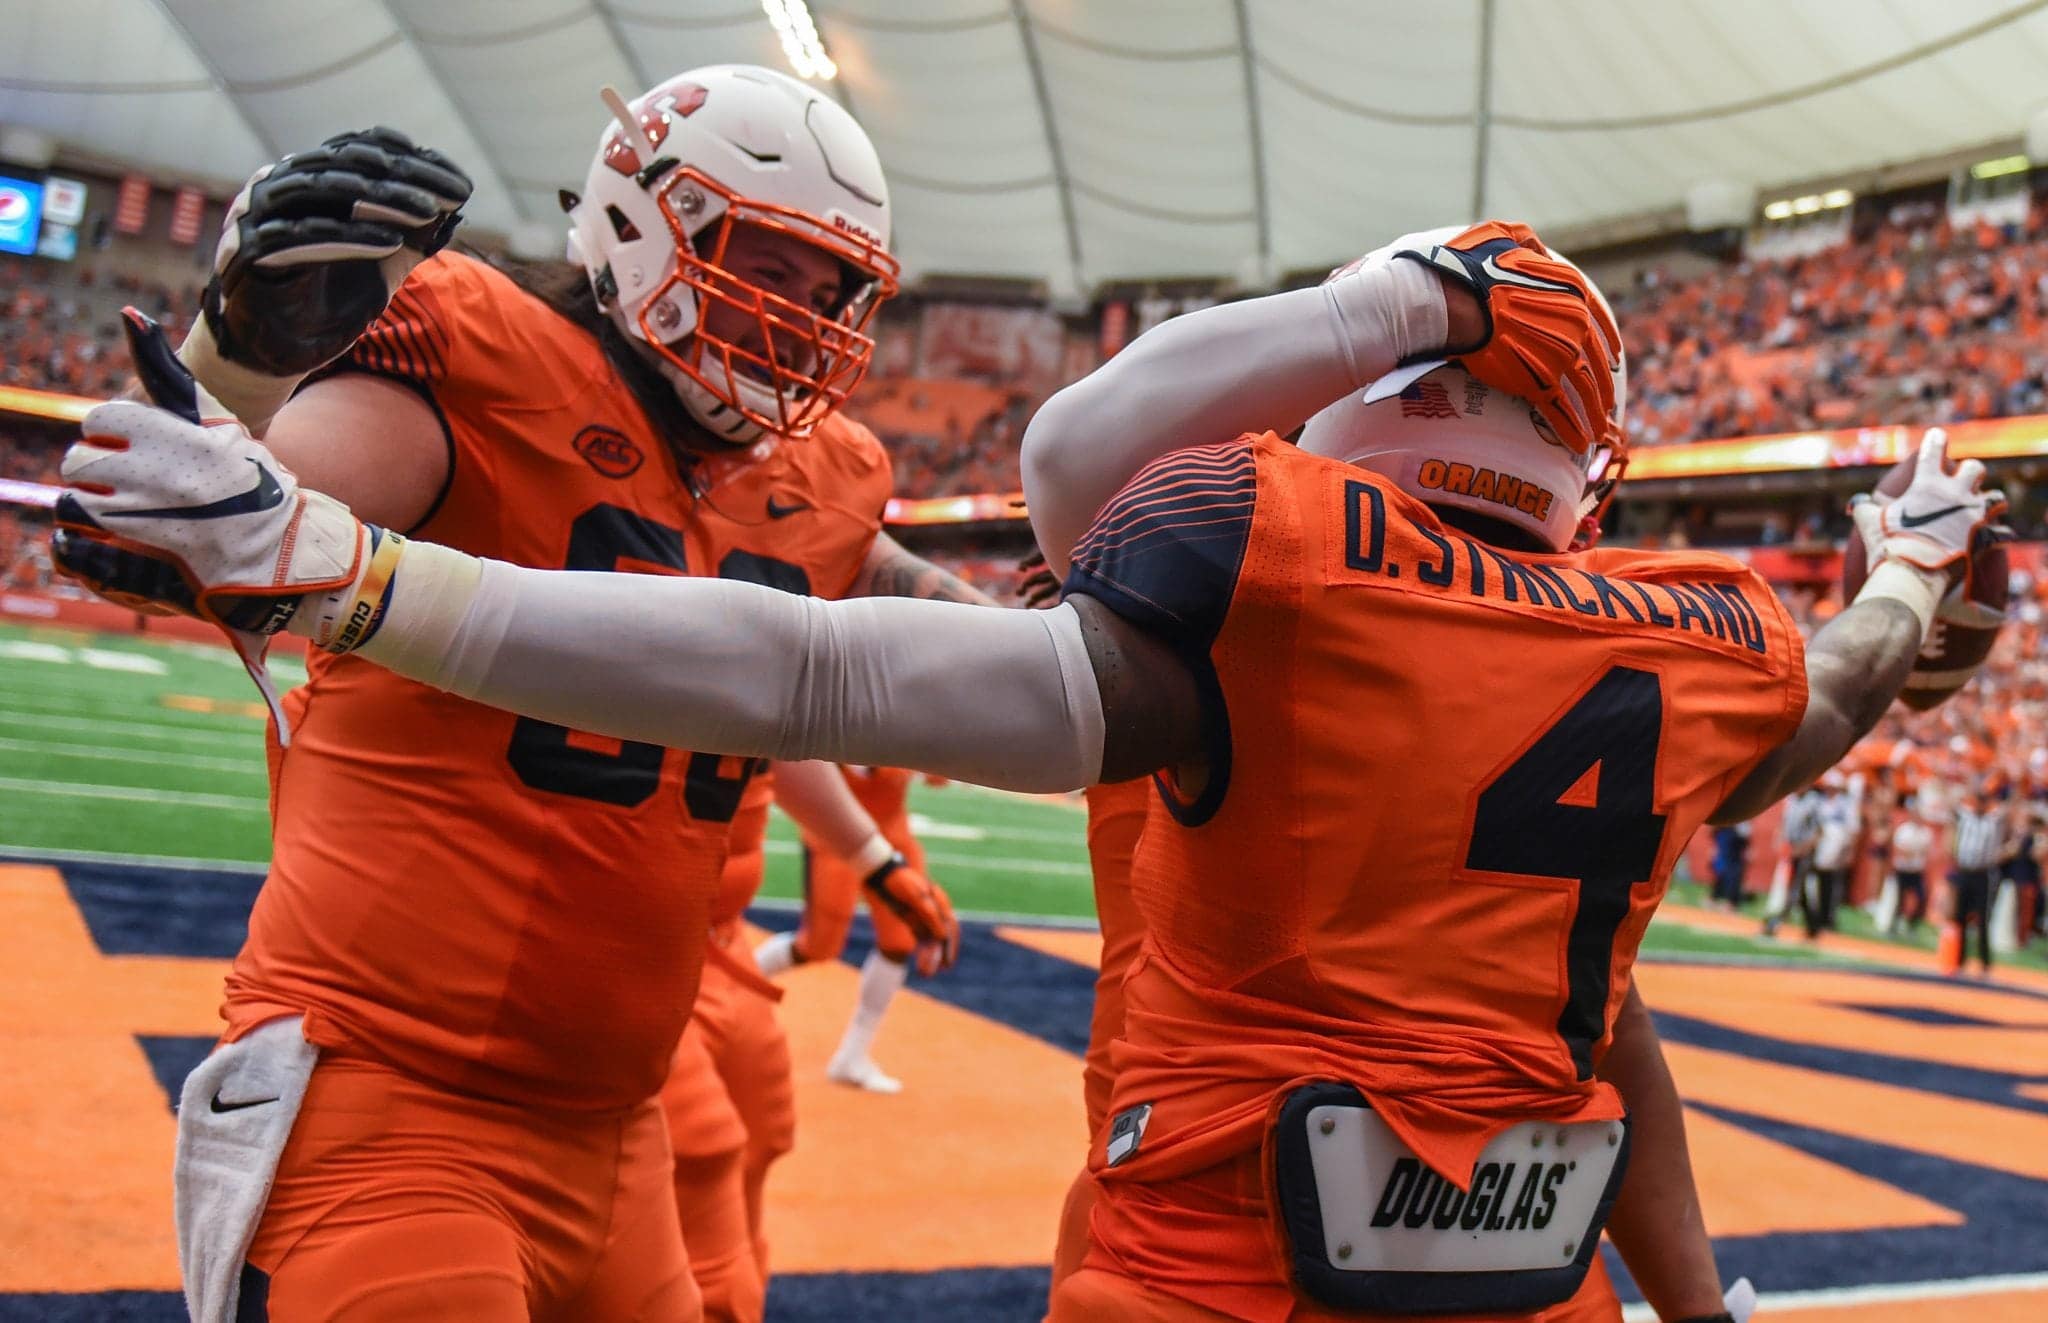 Syracuse University running back Dontae Strickland (4) celebrates a touchdown with his teammates during the Orange's 30-7 win over Florida State.